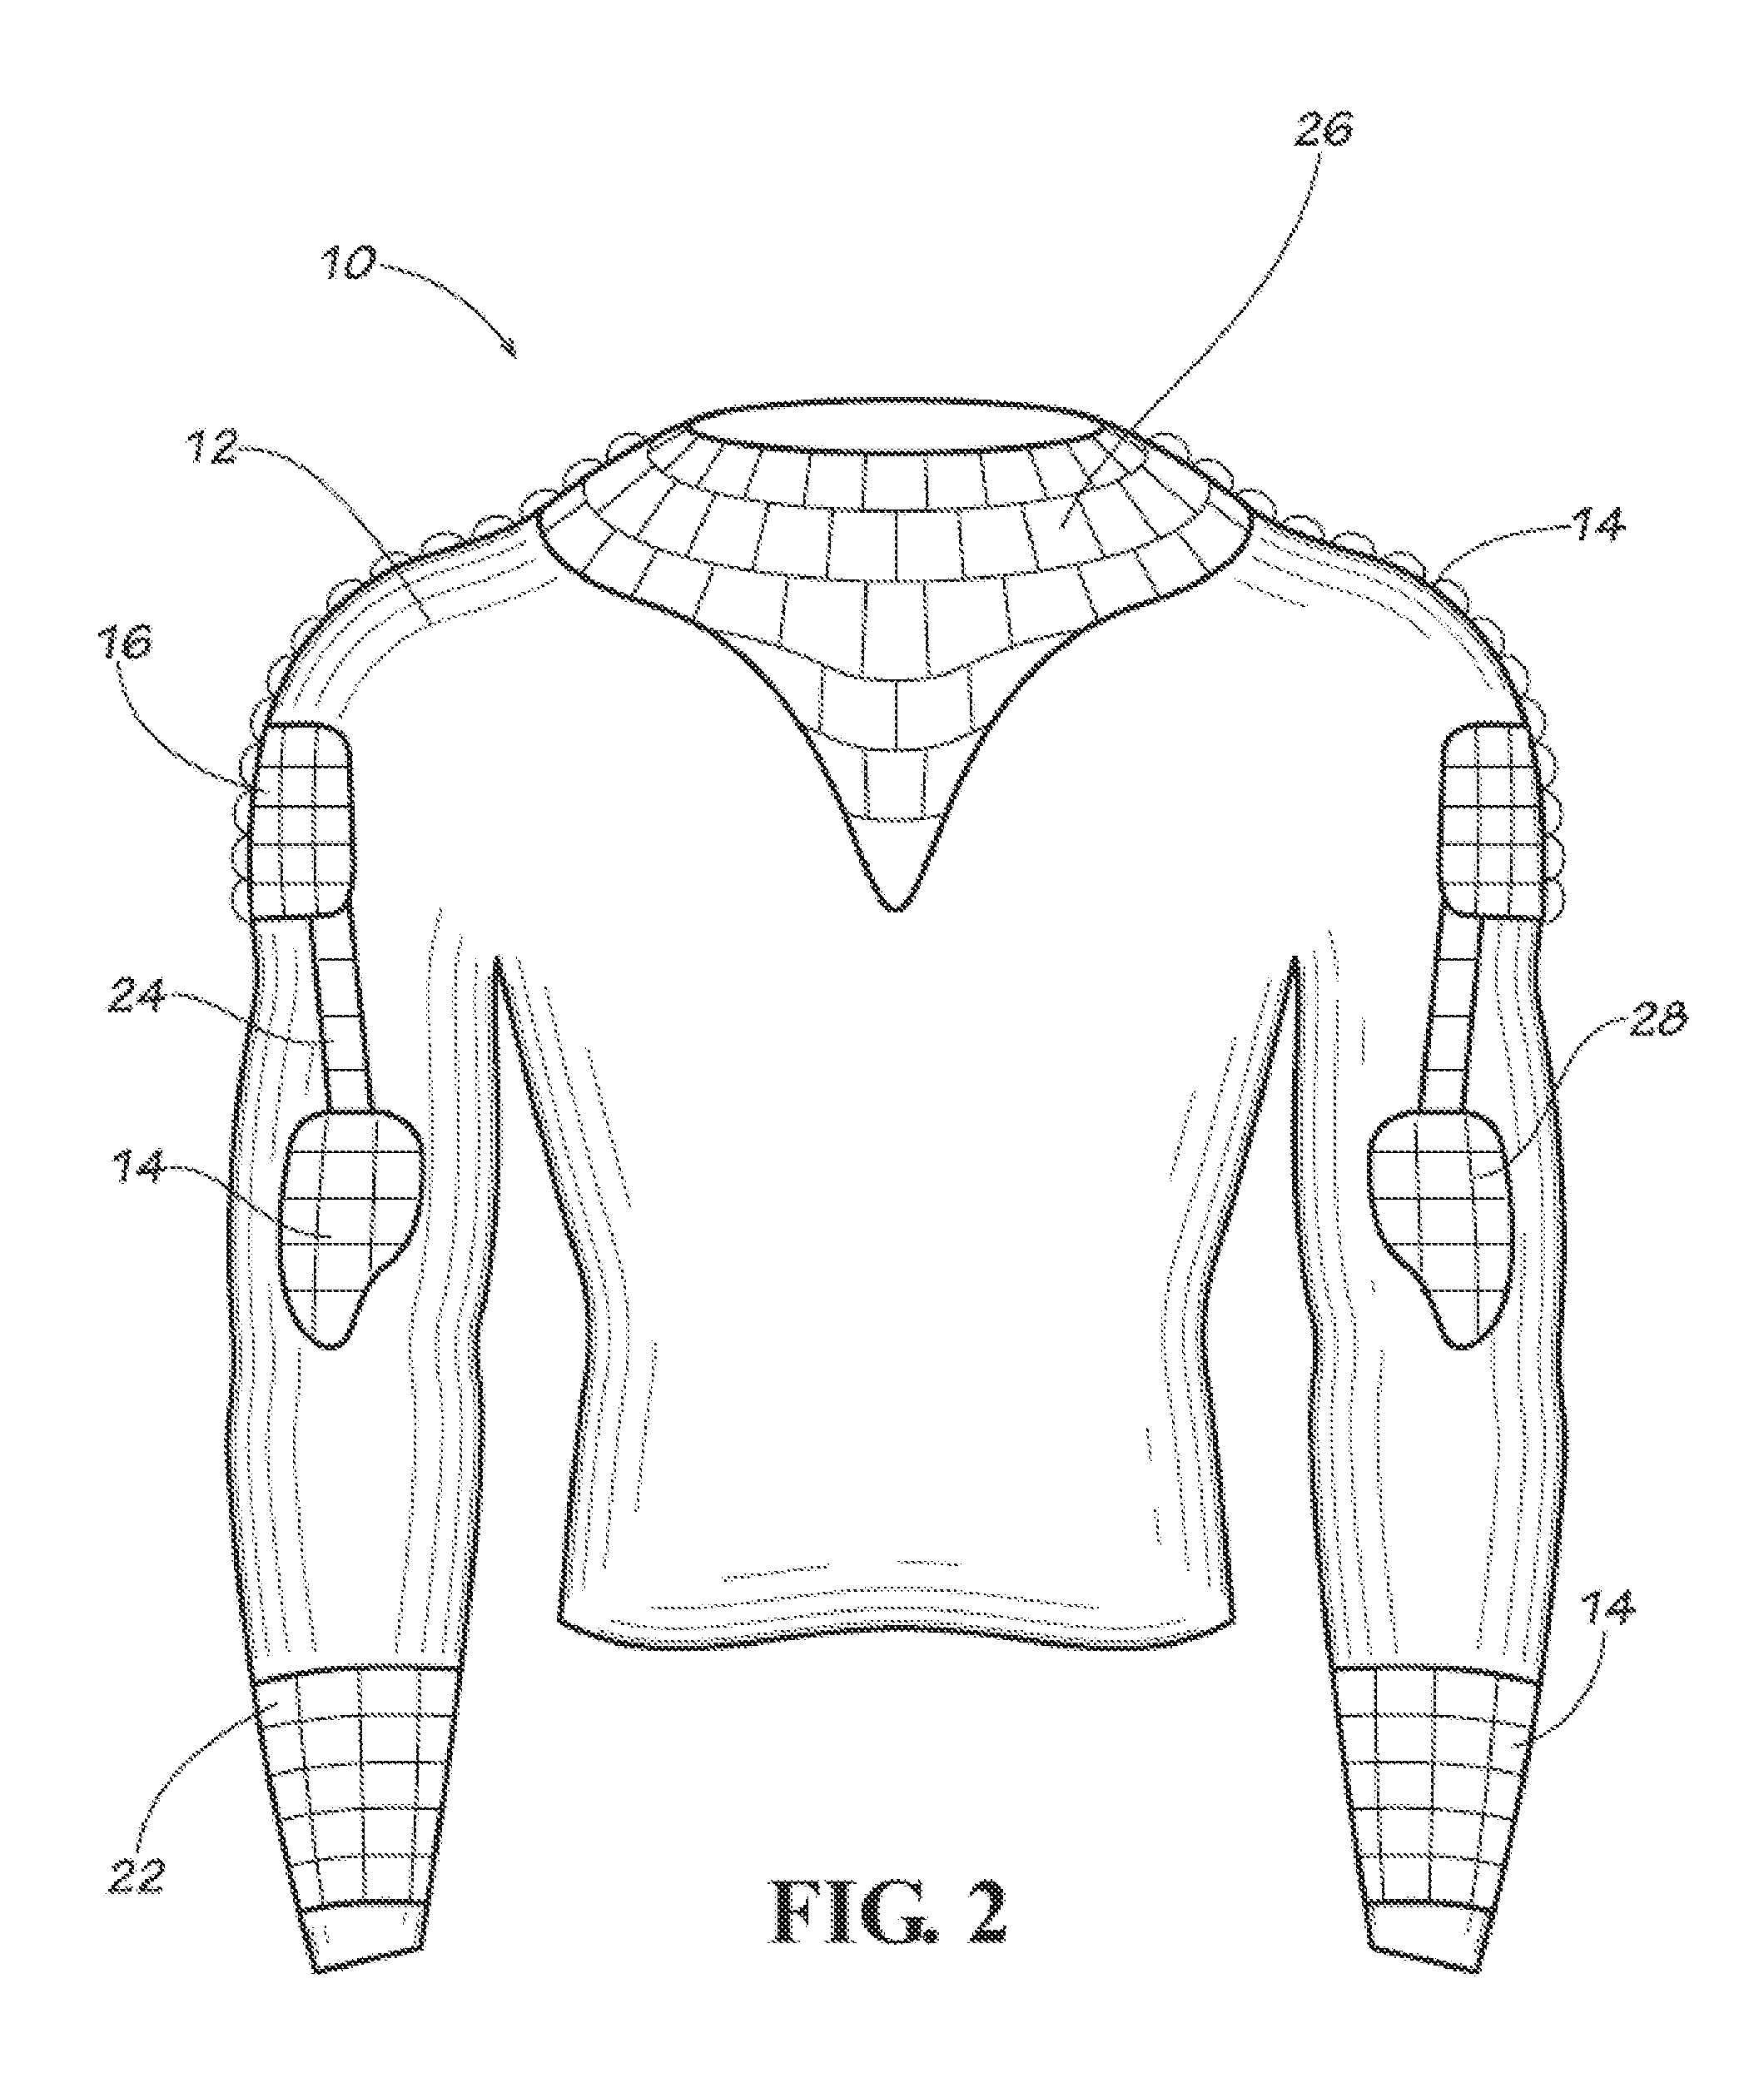 Clothing Systems Having Resistance Properties